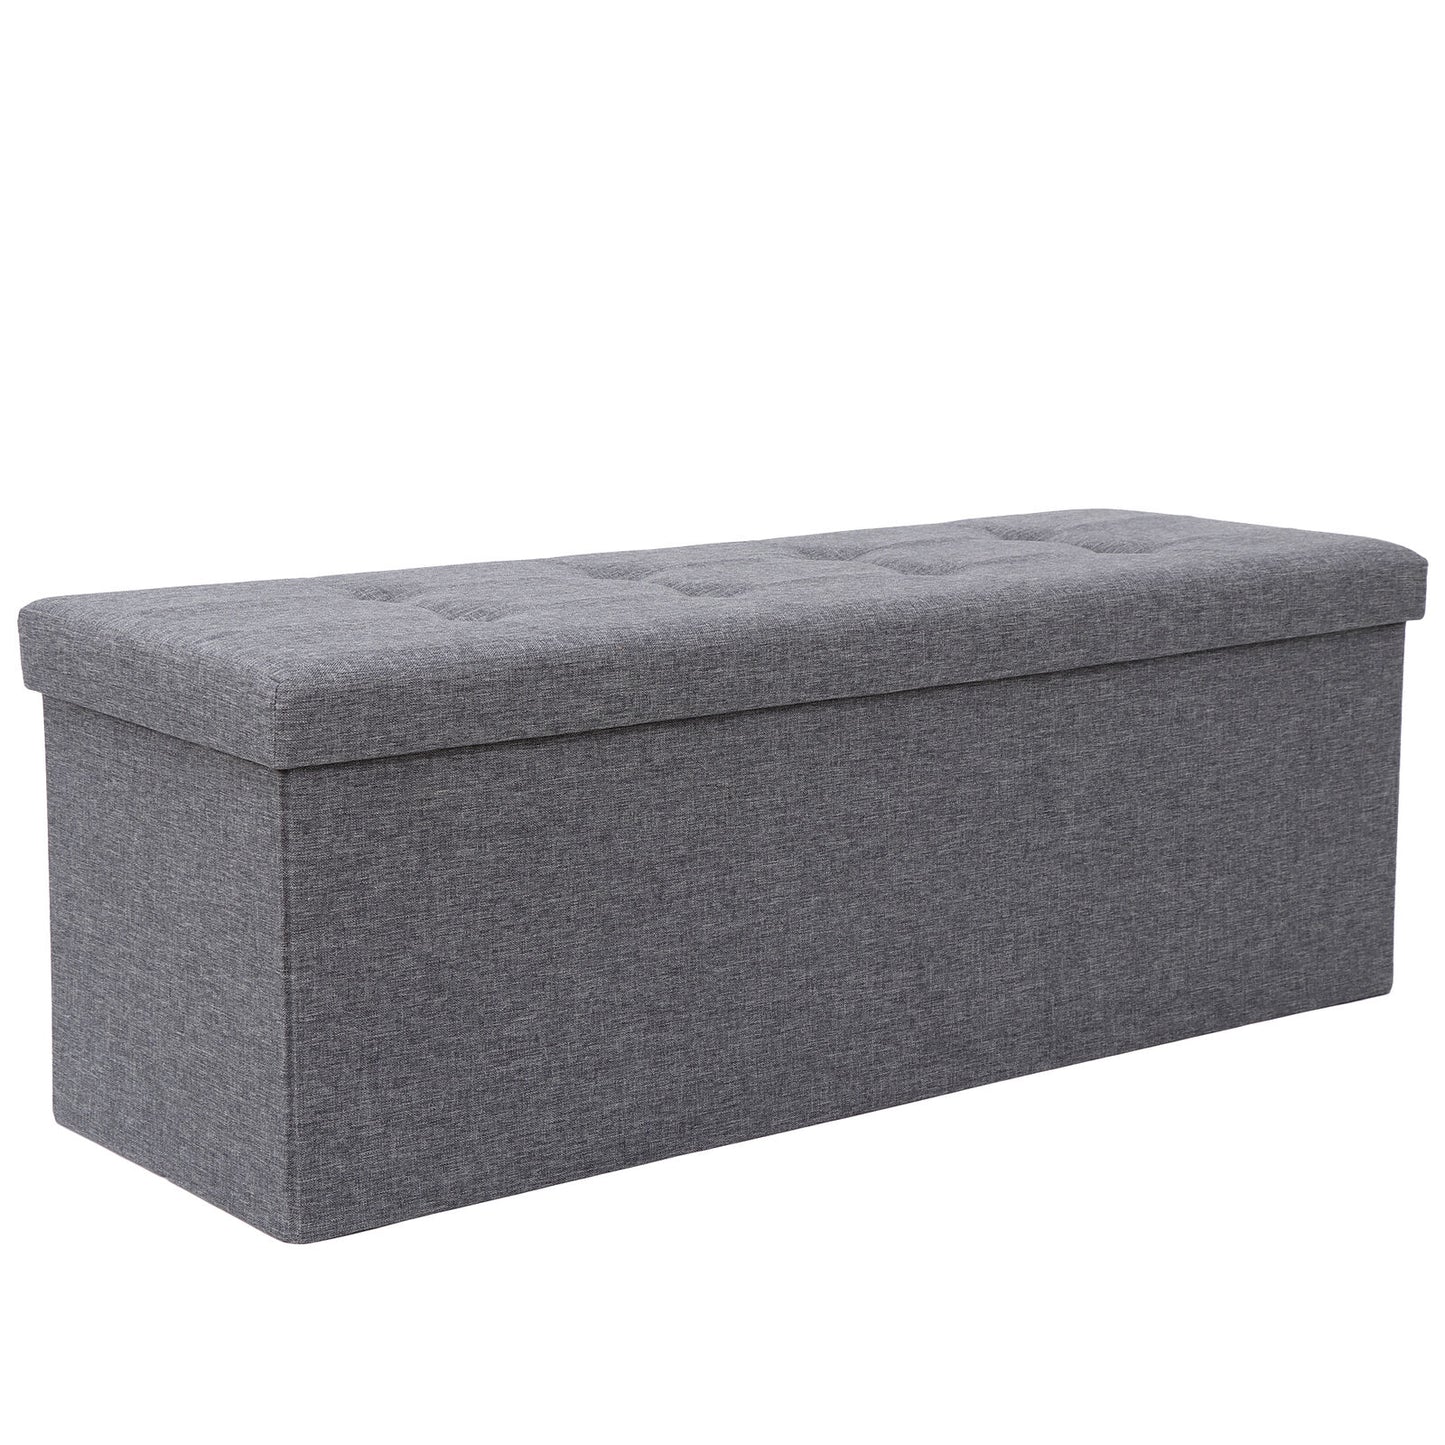 43"Folding Storage Fabric Ottoman Bench Chest Box Footrest Stools W/Wood Divier